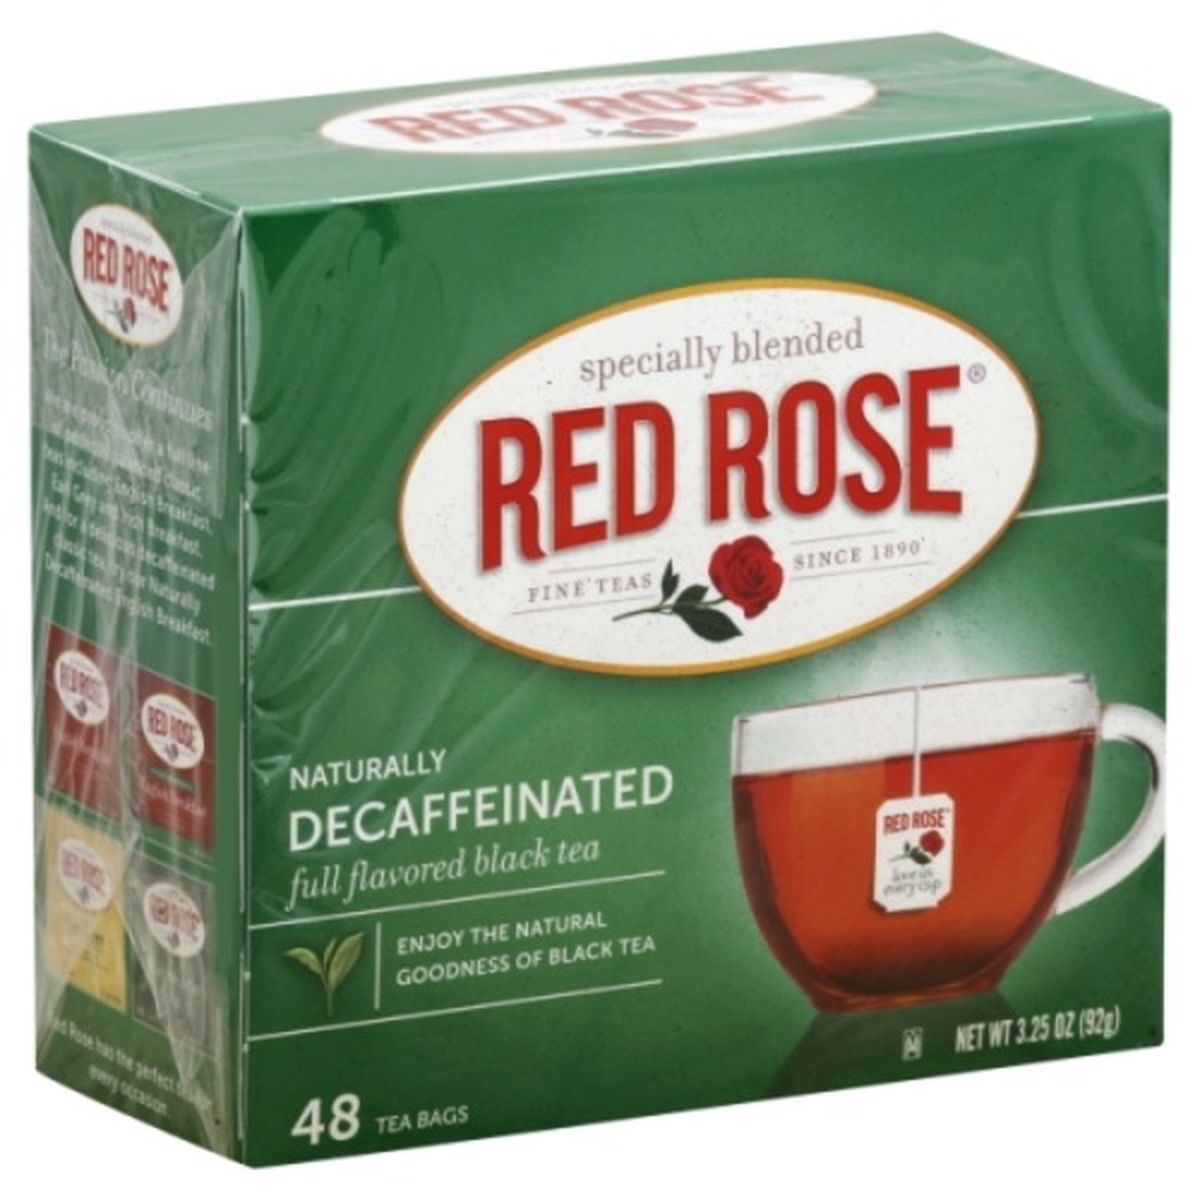 Calories in Red Rose Black Tea, Full Flavored, Naturally Decaffeinated, Bags